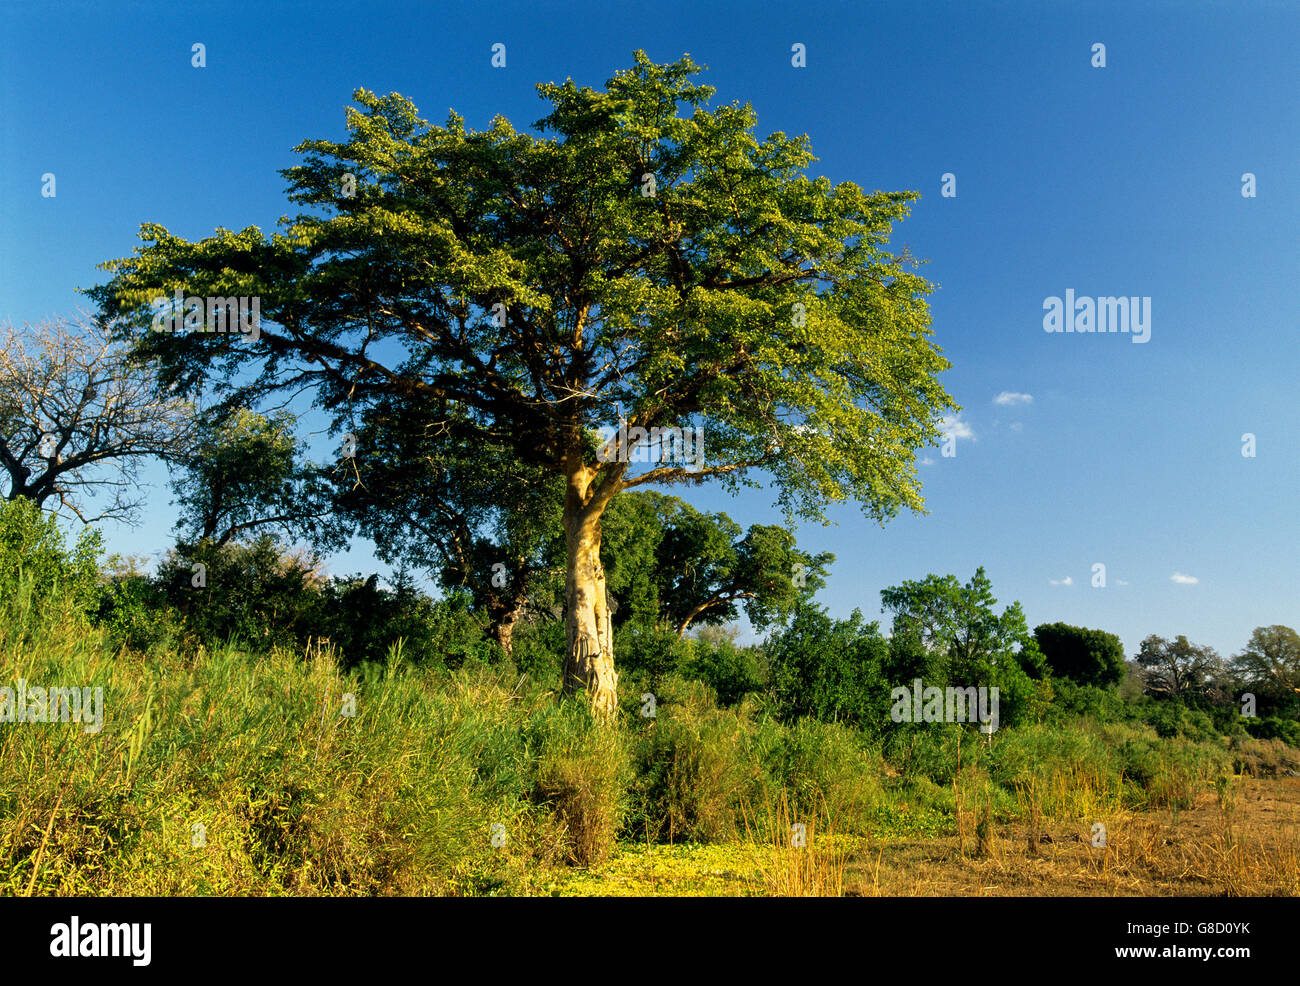 Fig tree, Lowveld scene, South Africa. Stock Photo